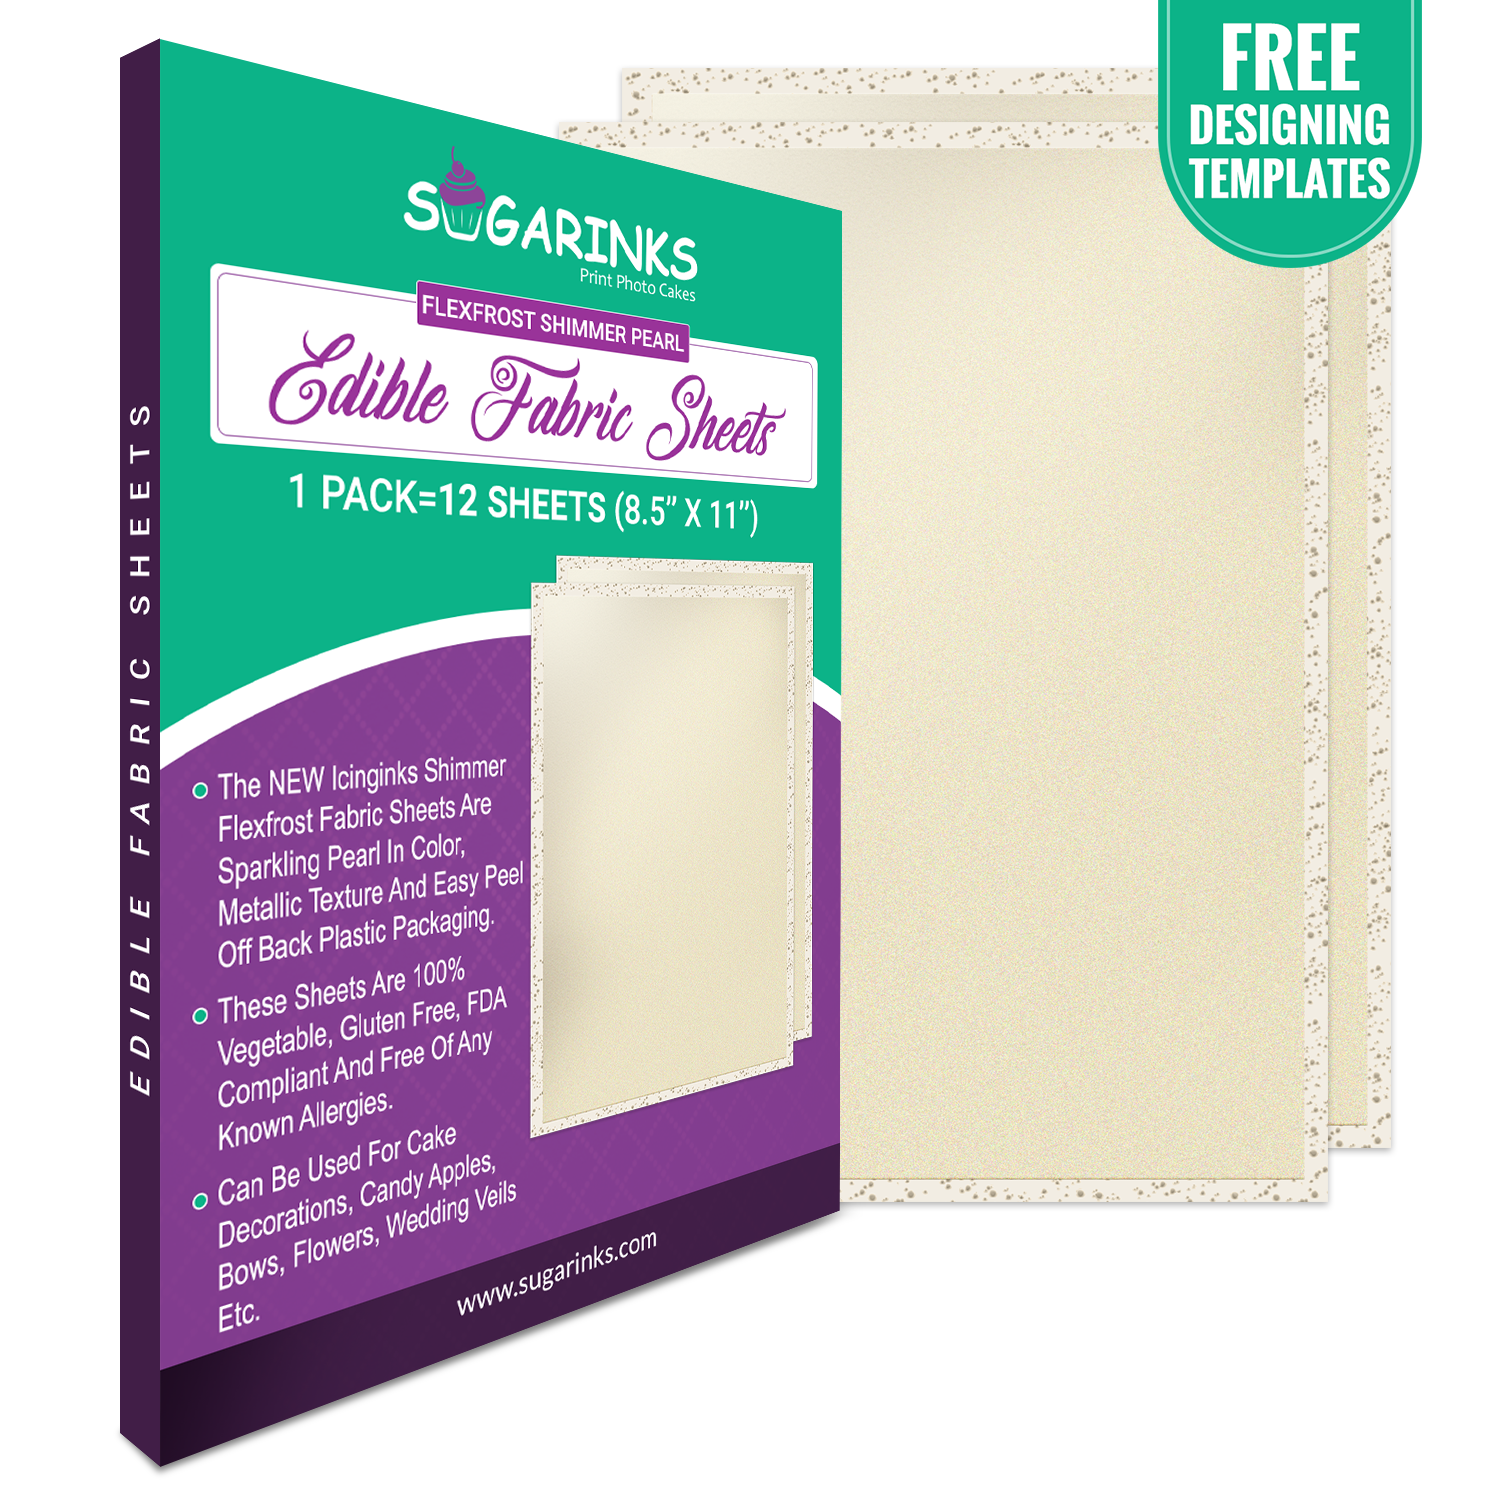 Sugarinks Premium Quality Flexfrost Shimmer Edible Fabric Sheets A4 Size (8.5”X11”) Pack of 12 – Sparkling Pearl